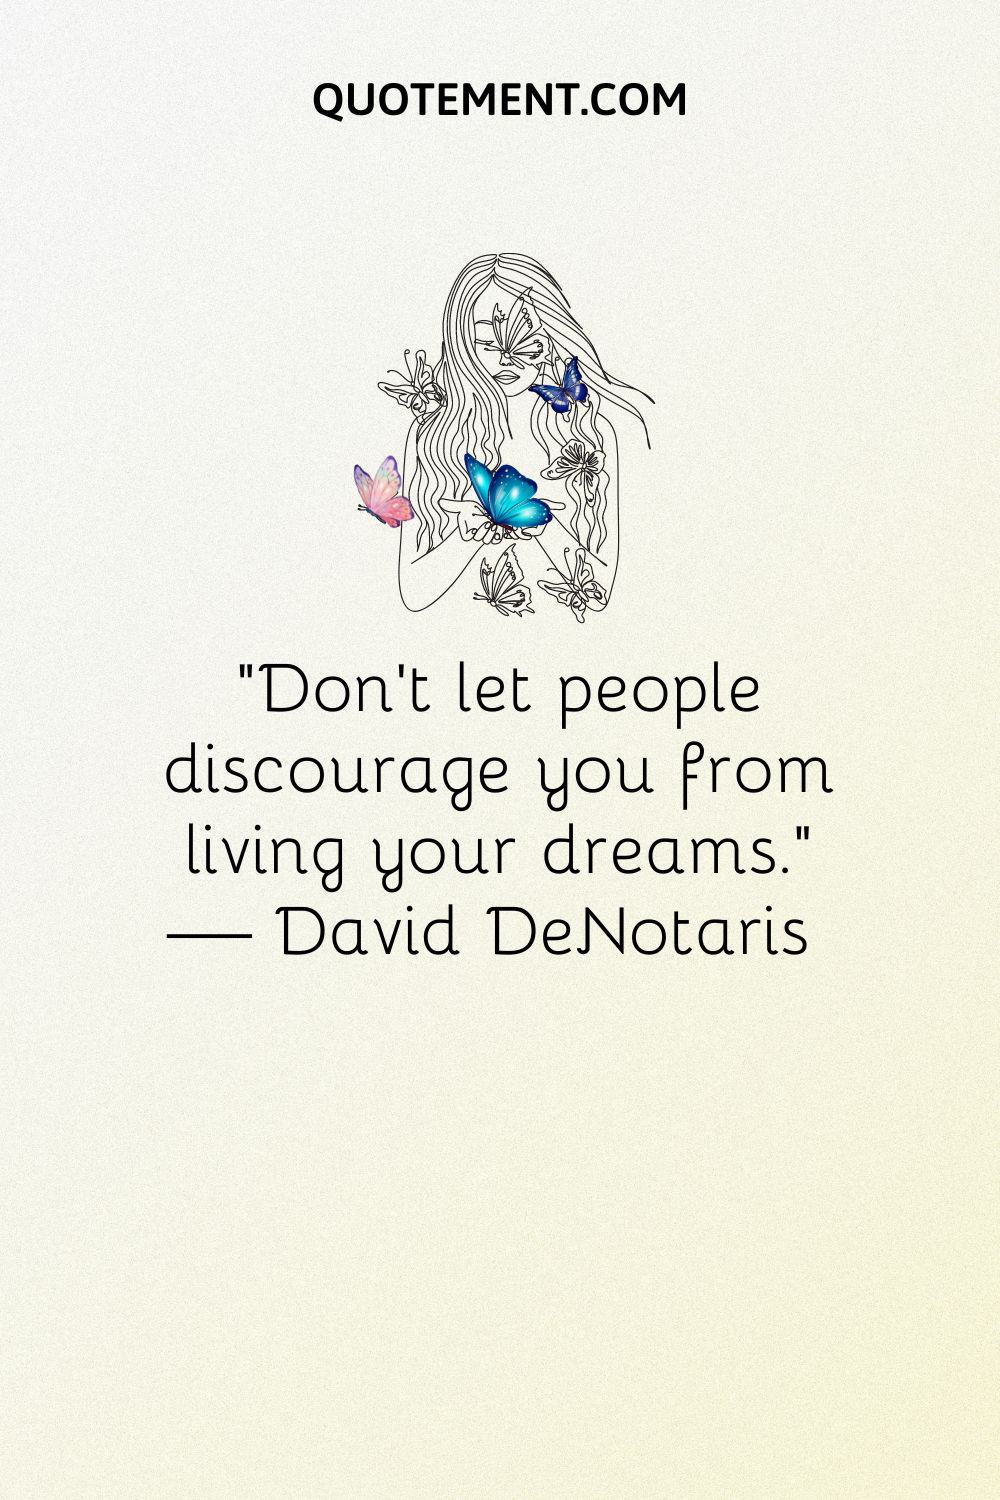 butterflies on a long-haired girl image representing live your dream quote